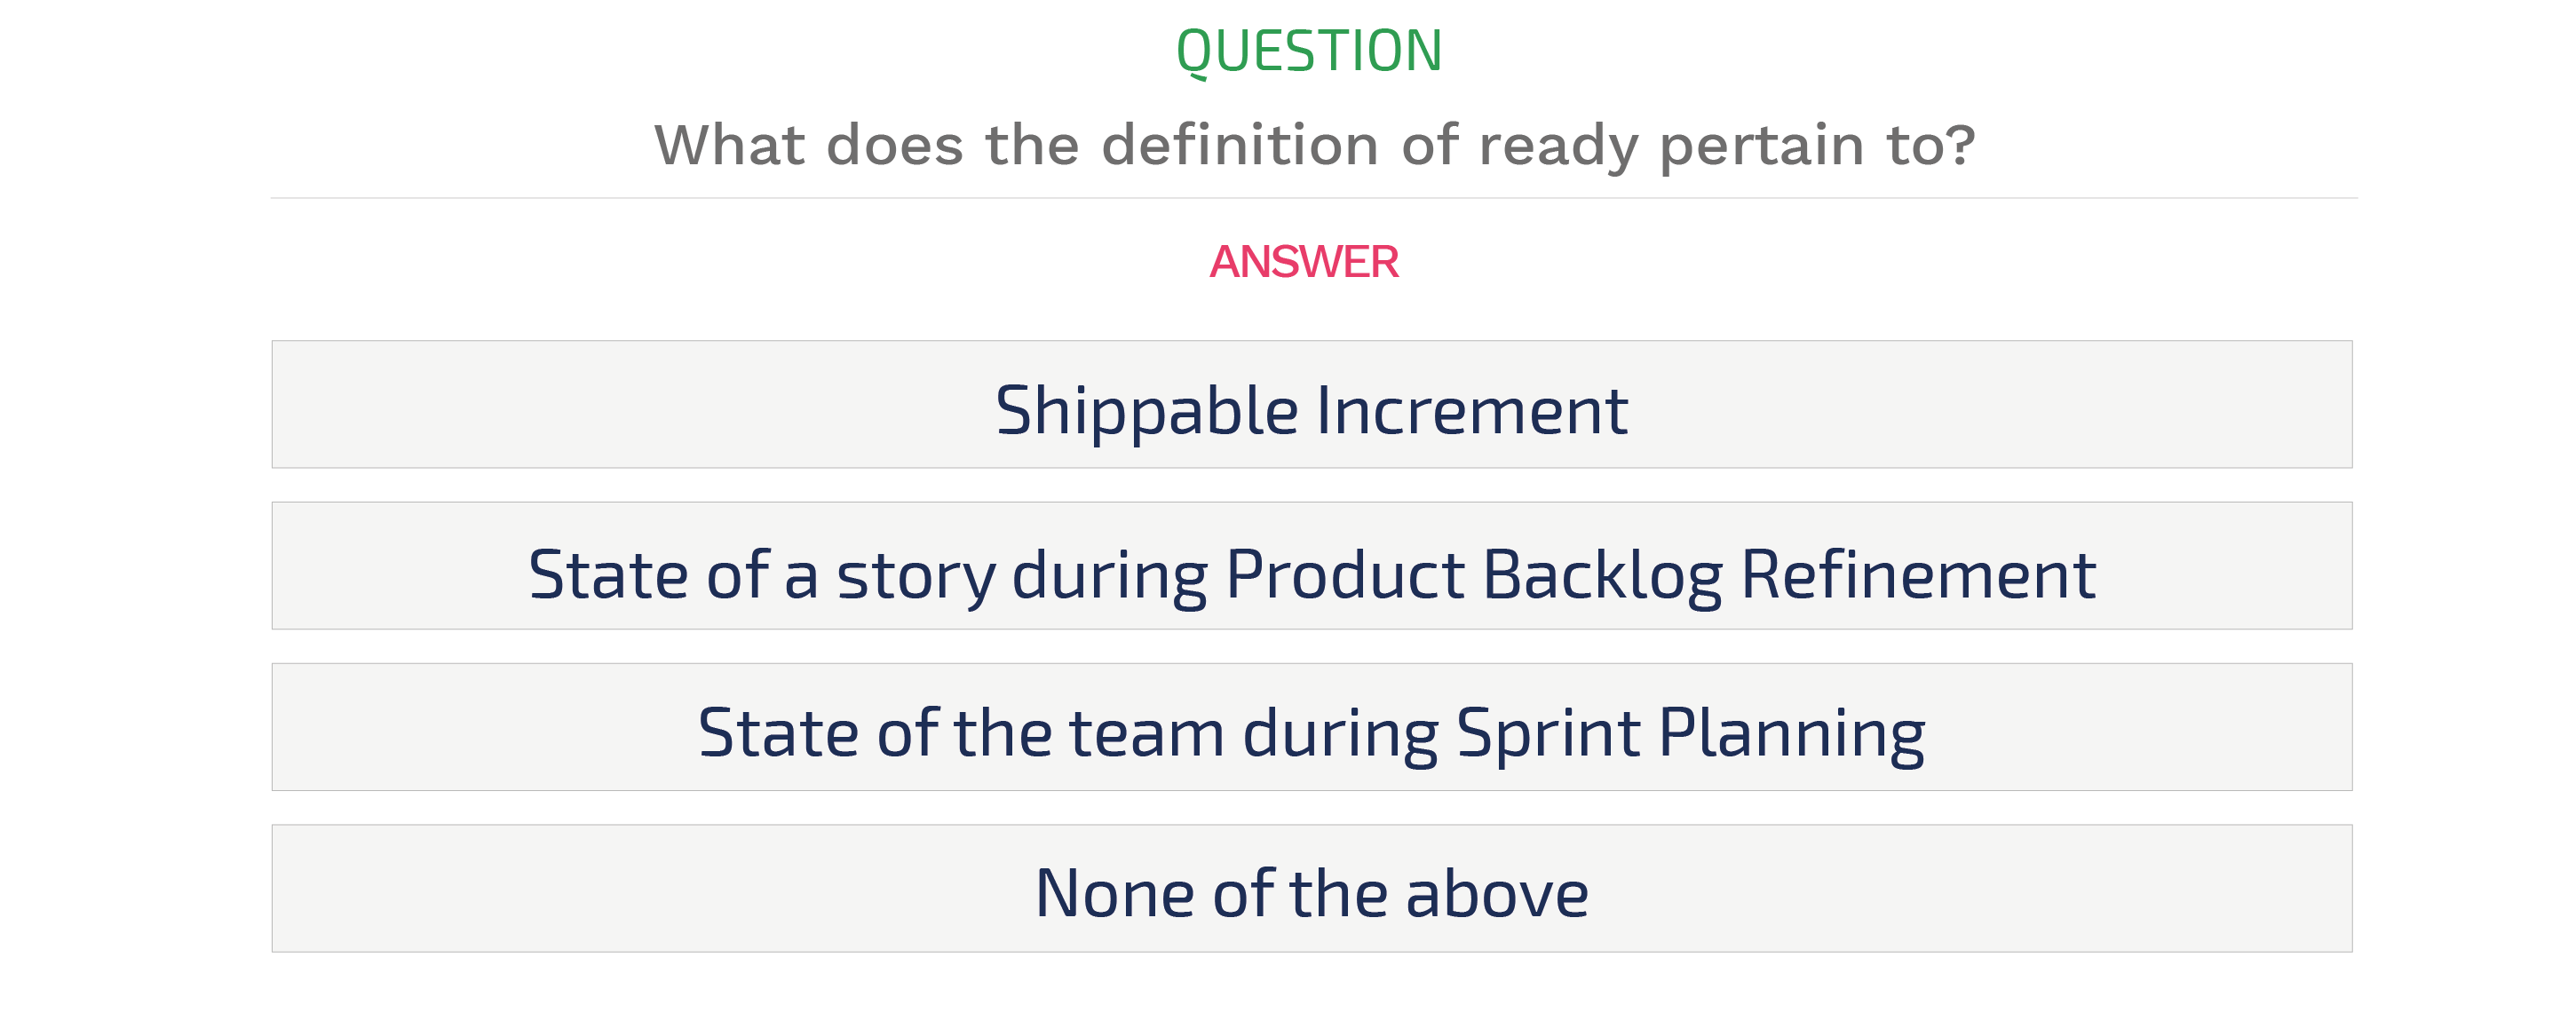 scrum-psm-test-example-question